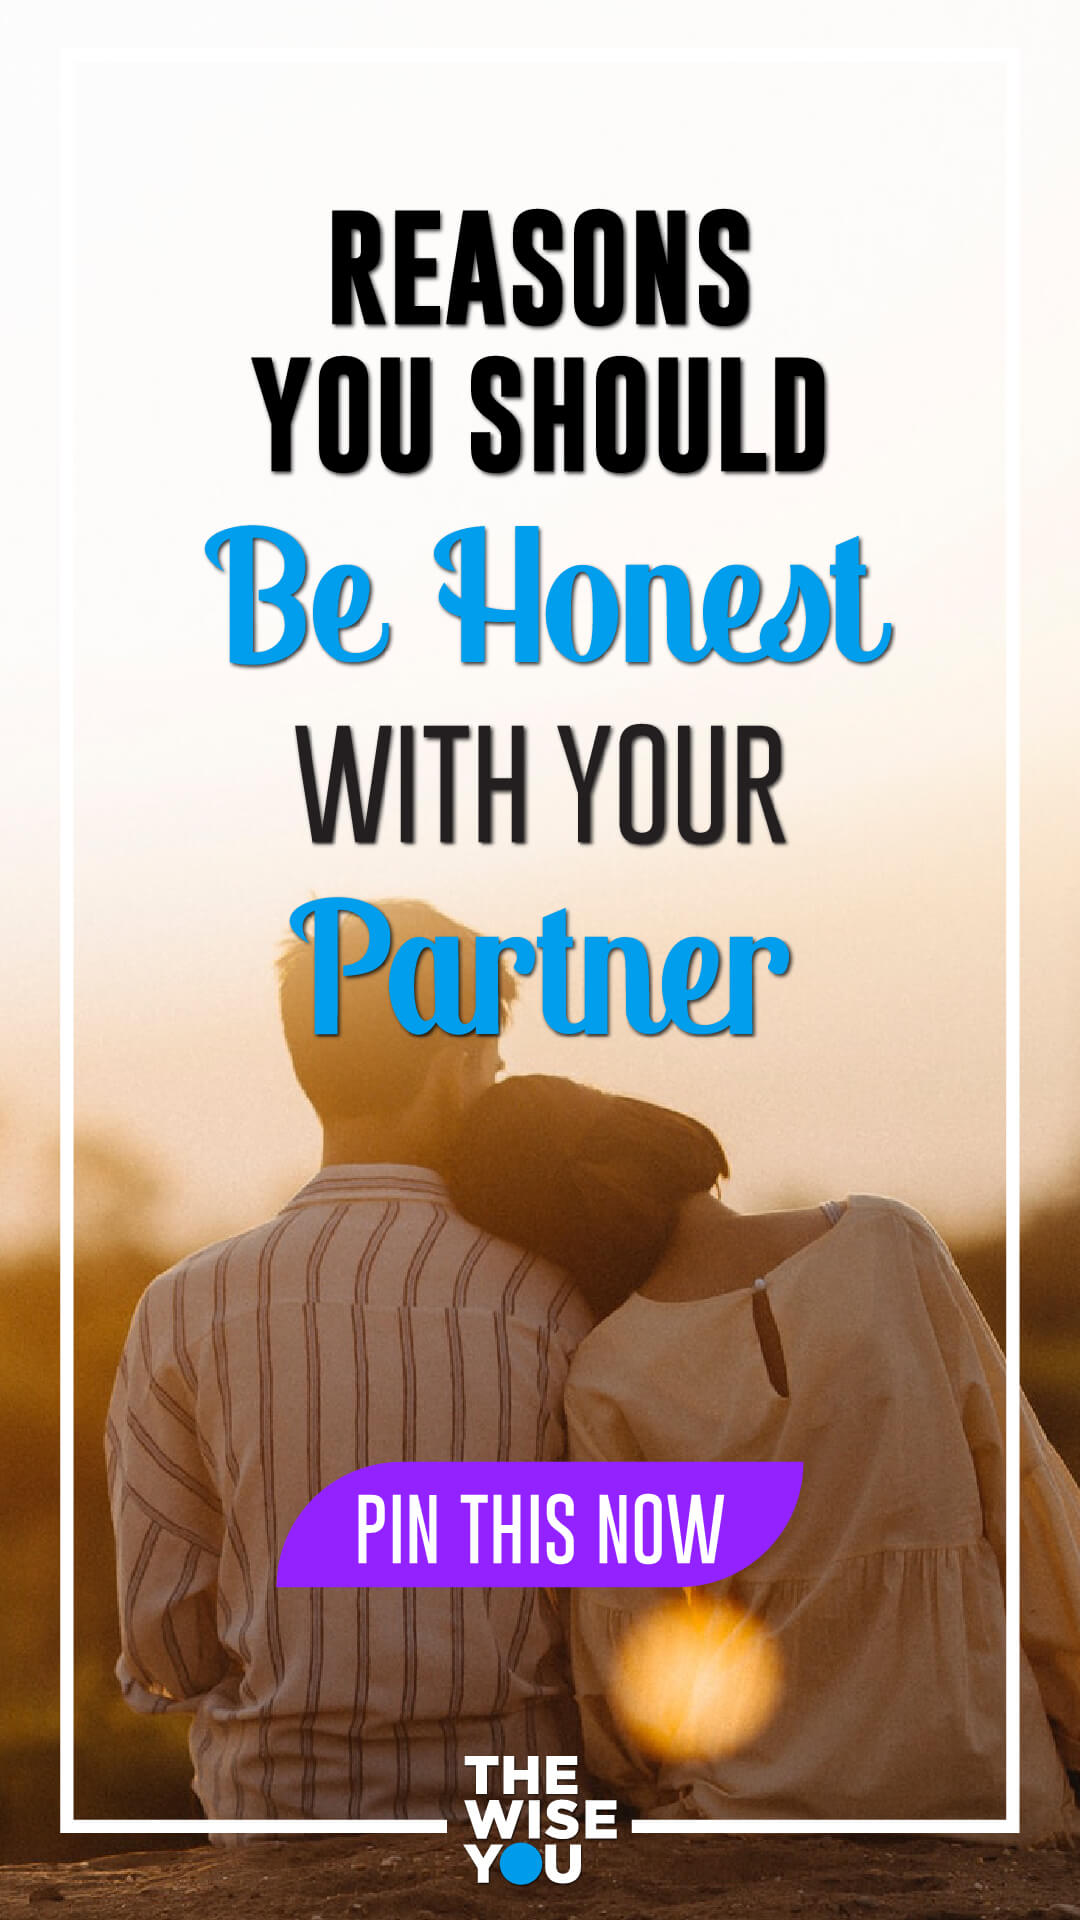 Reasons You Should Be Honest with Your Partner